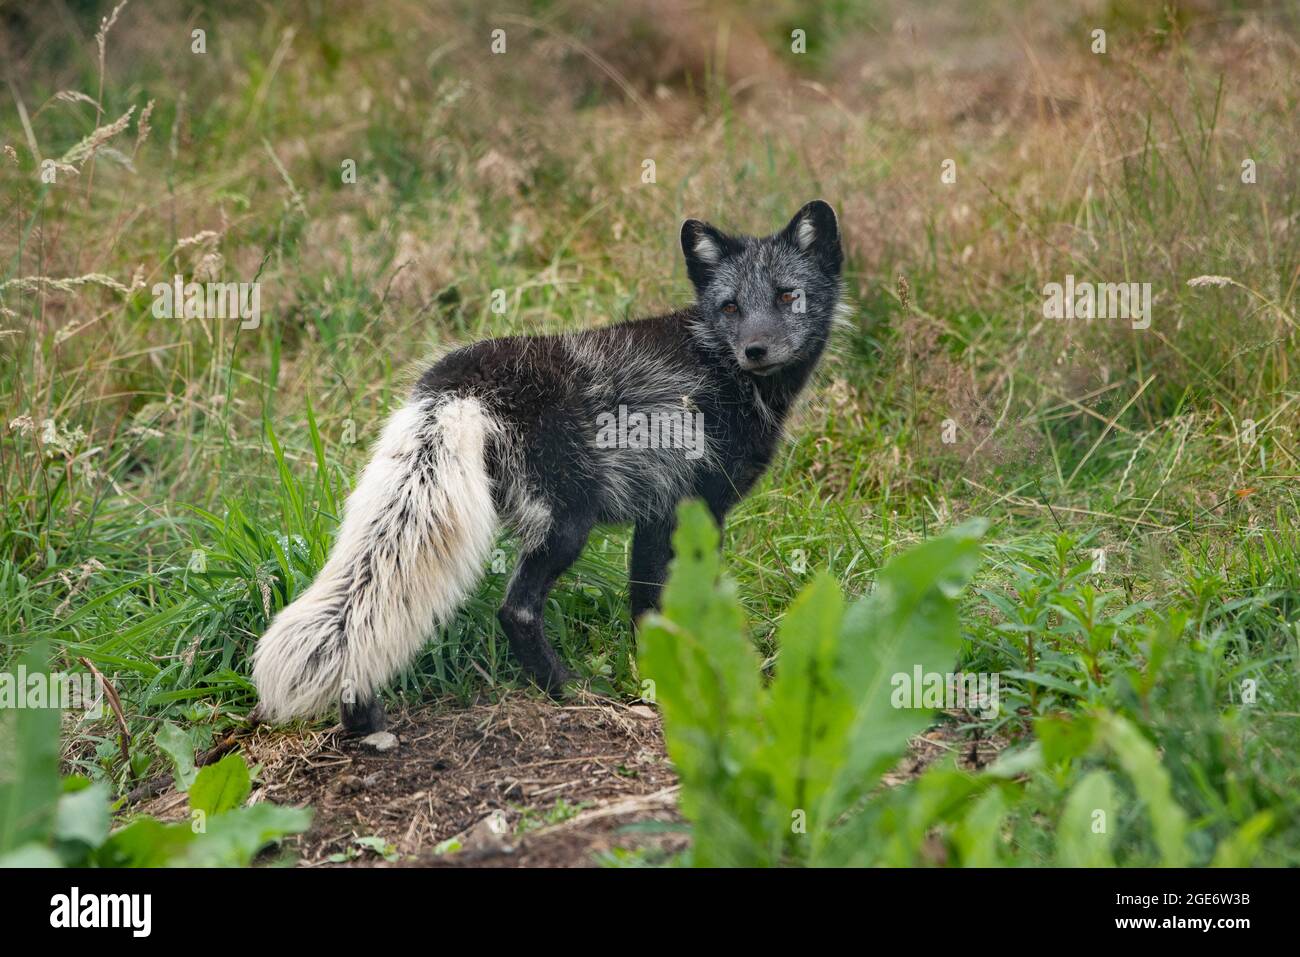 An Arctic fox at Highland Wildlife Park and zoo near Kingussie, Highland, Scotland. The park is located within the Cairngorms National Park. Stock Photo